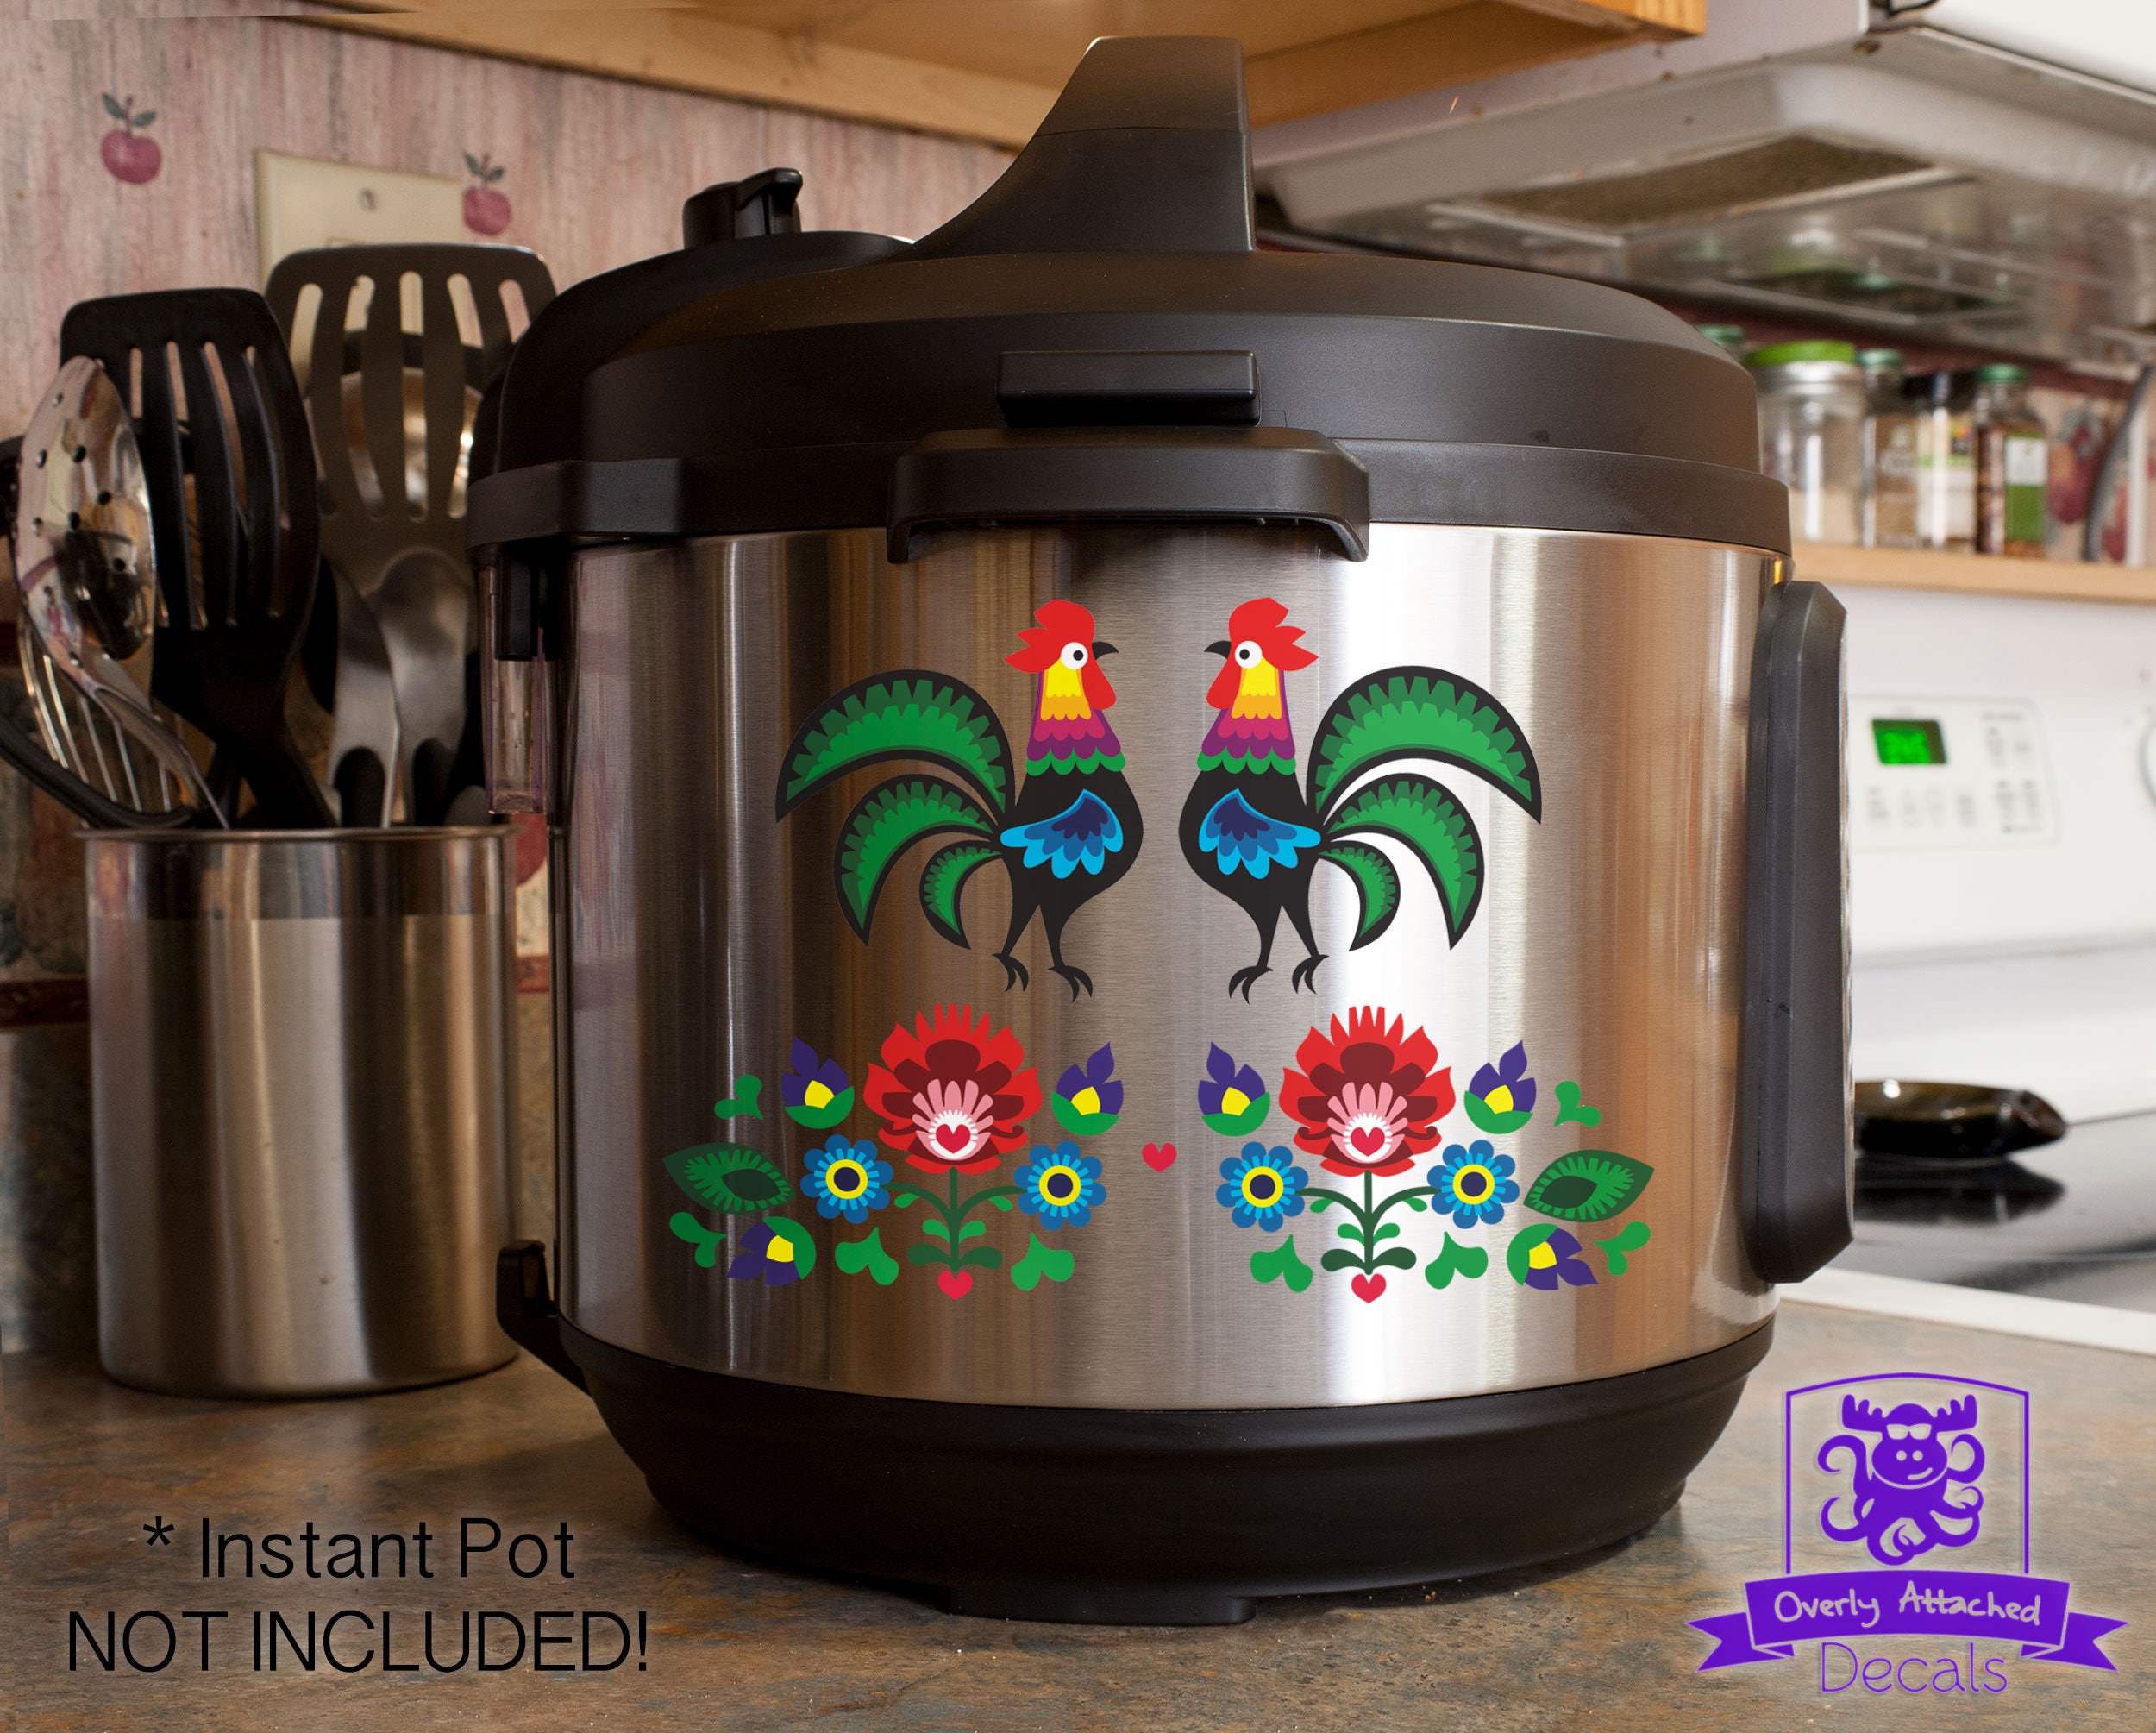 How to Make Vinyl Decals (+ Designs for Instant Pot, KitchenAid